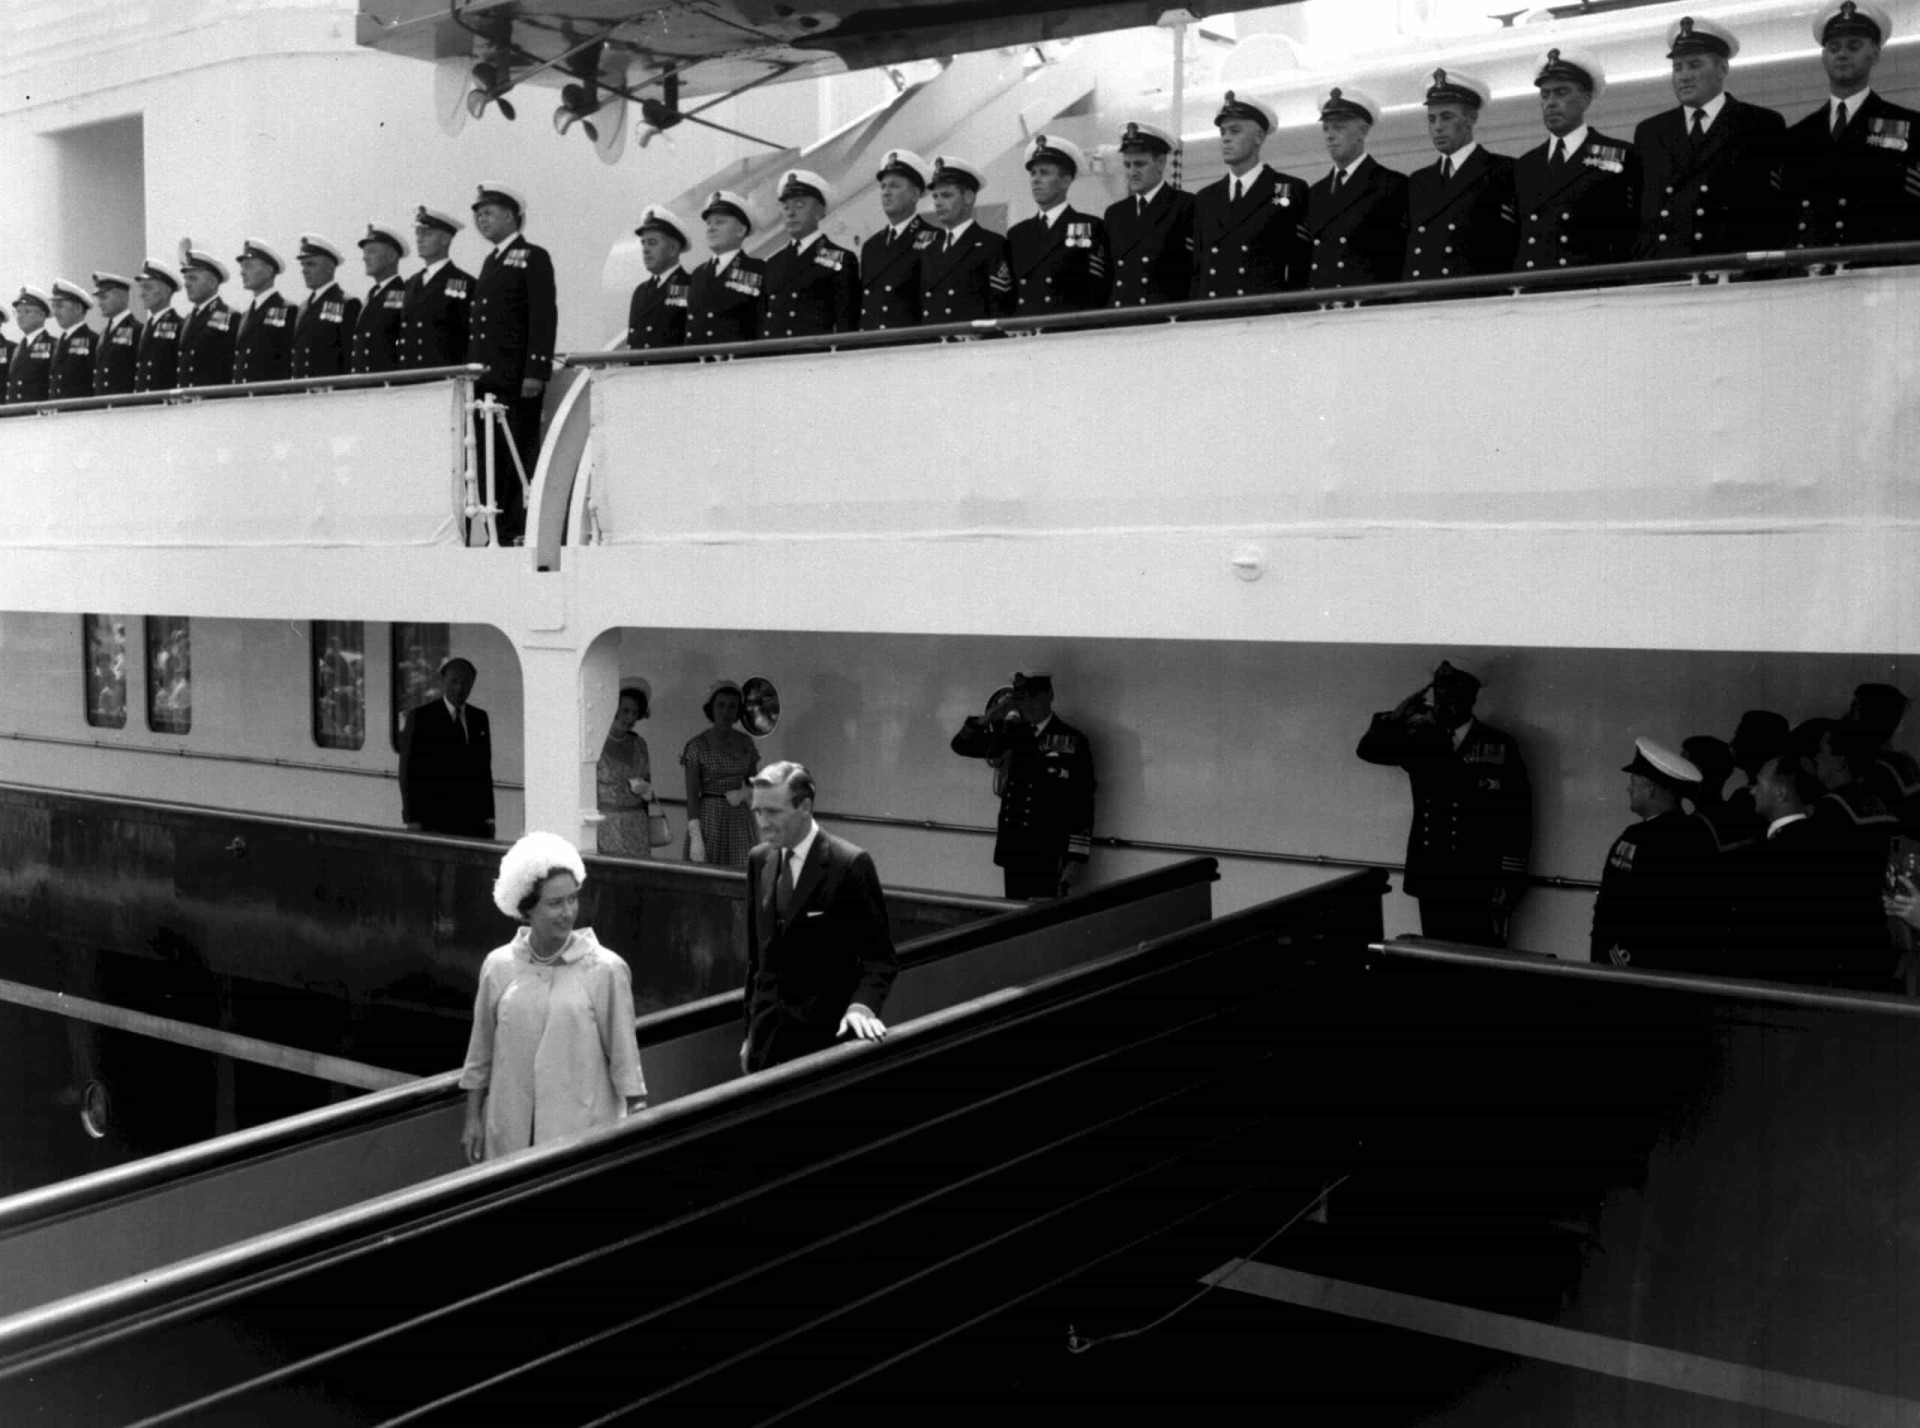 <p>HMY <em>Britannia</em> soon proved her worth as an ideal honeymoon cruise vessel. Princess Margaret and her husband, Antony Armstrong-Jones, 1st Earl of Snowdon, were the first royal couple to enjoy their honeymoon at sea, in 1960. Their voyage started a tradition where the yacht could access secluded locations away from the world's press to provide just-married British royalty with the privacy they desired.</p><p><a href="https://www.msn.com/en-ph/community/channel/vid-7xx8mnucu55yw63we9va2gwr7uihbxwc68fxqp25x6tg4ftibpra?cvid=94631541bc0f4f89bfd59158d696ad7e">Follow us and access great exclusive content every day</a></p>